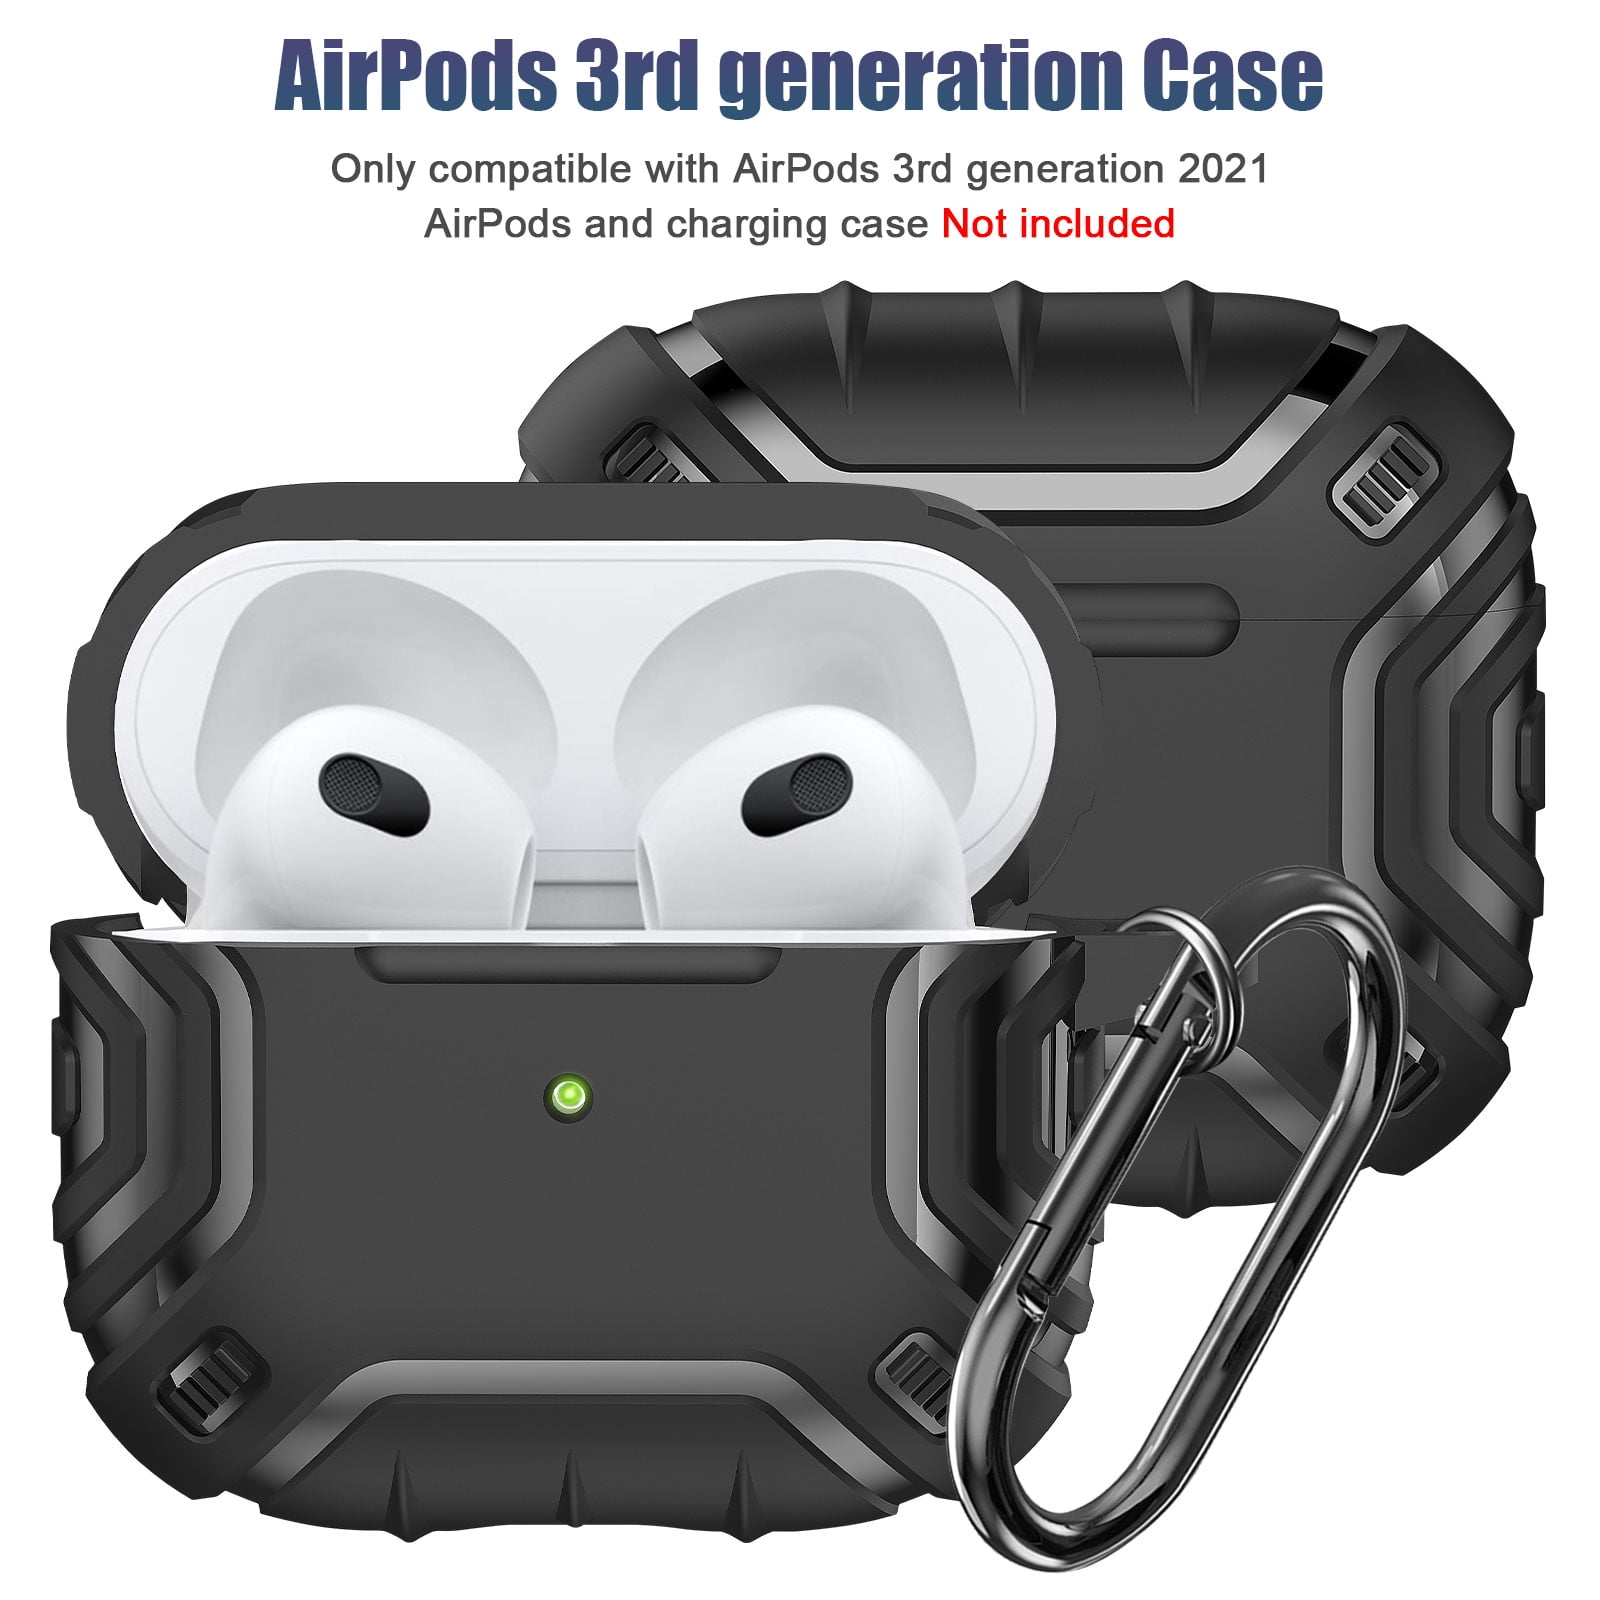 QINGQING Airpods 3rd Generation Cases 2021 Switch Case for Airpods 3 Case  Cover Men Kids Teens Boys …See more QINGQING Airpods 3rd Generation Cases